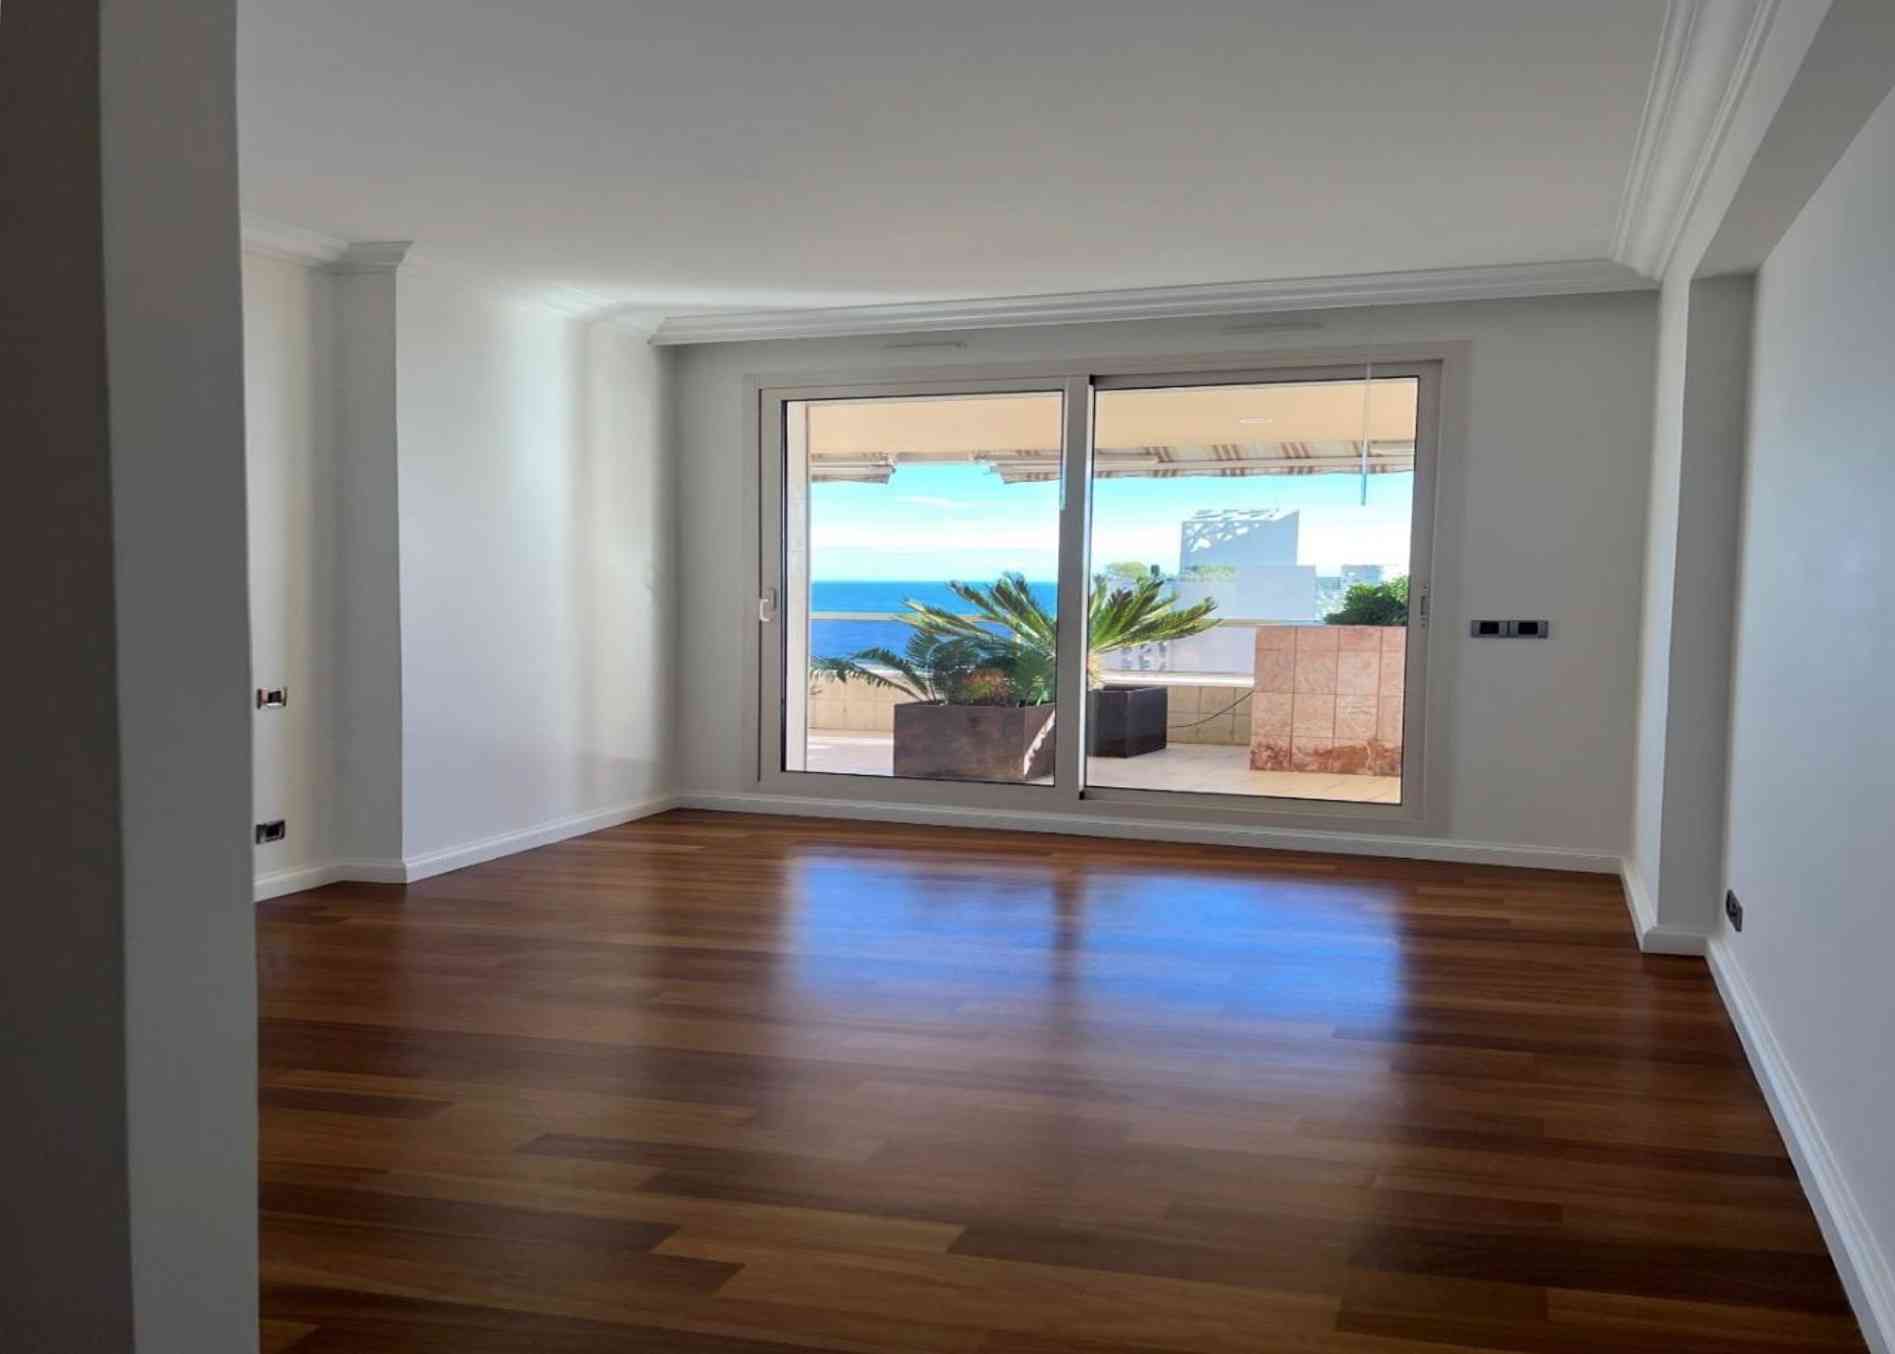                                                                                                                                         LARGE 4-5 MAIN ROOMS APARTMENT, BREATHTAKING VIEW OVER MONACO                                                                    
                                                             